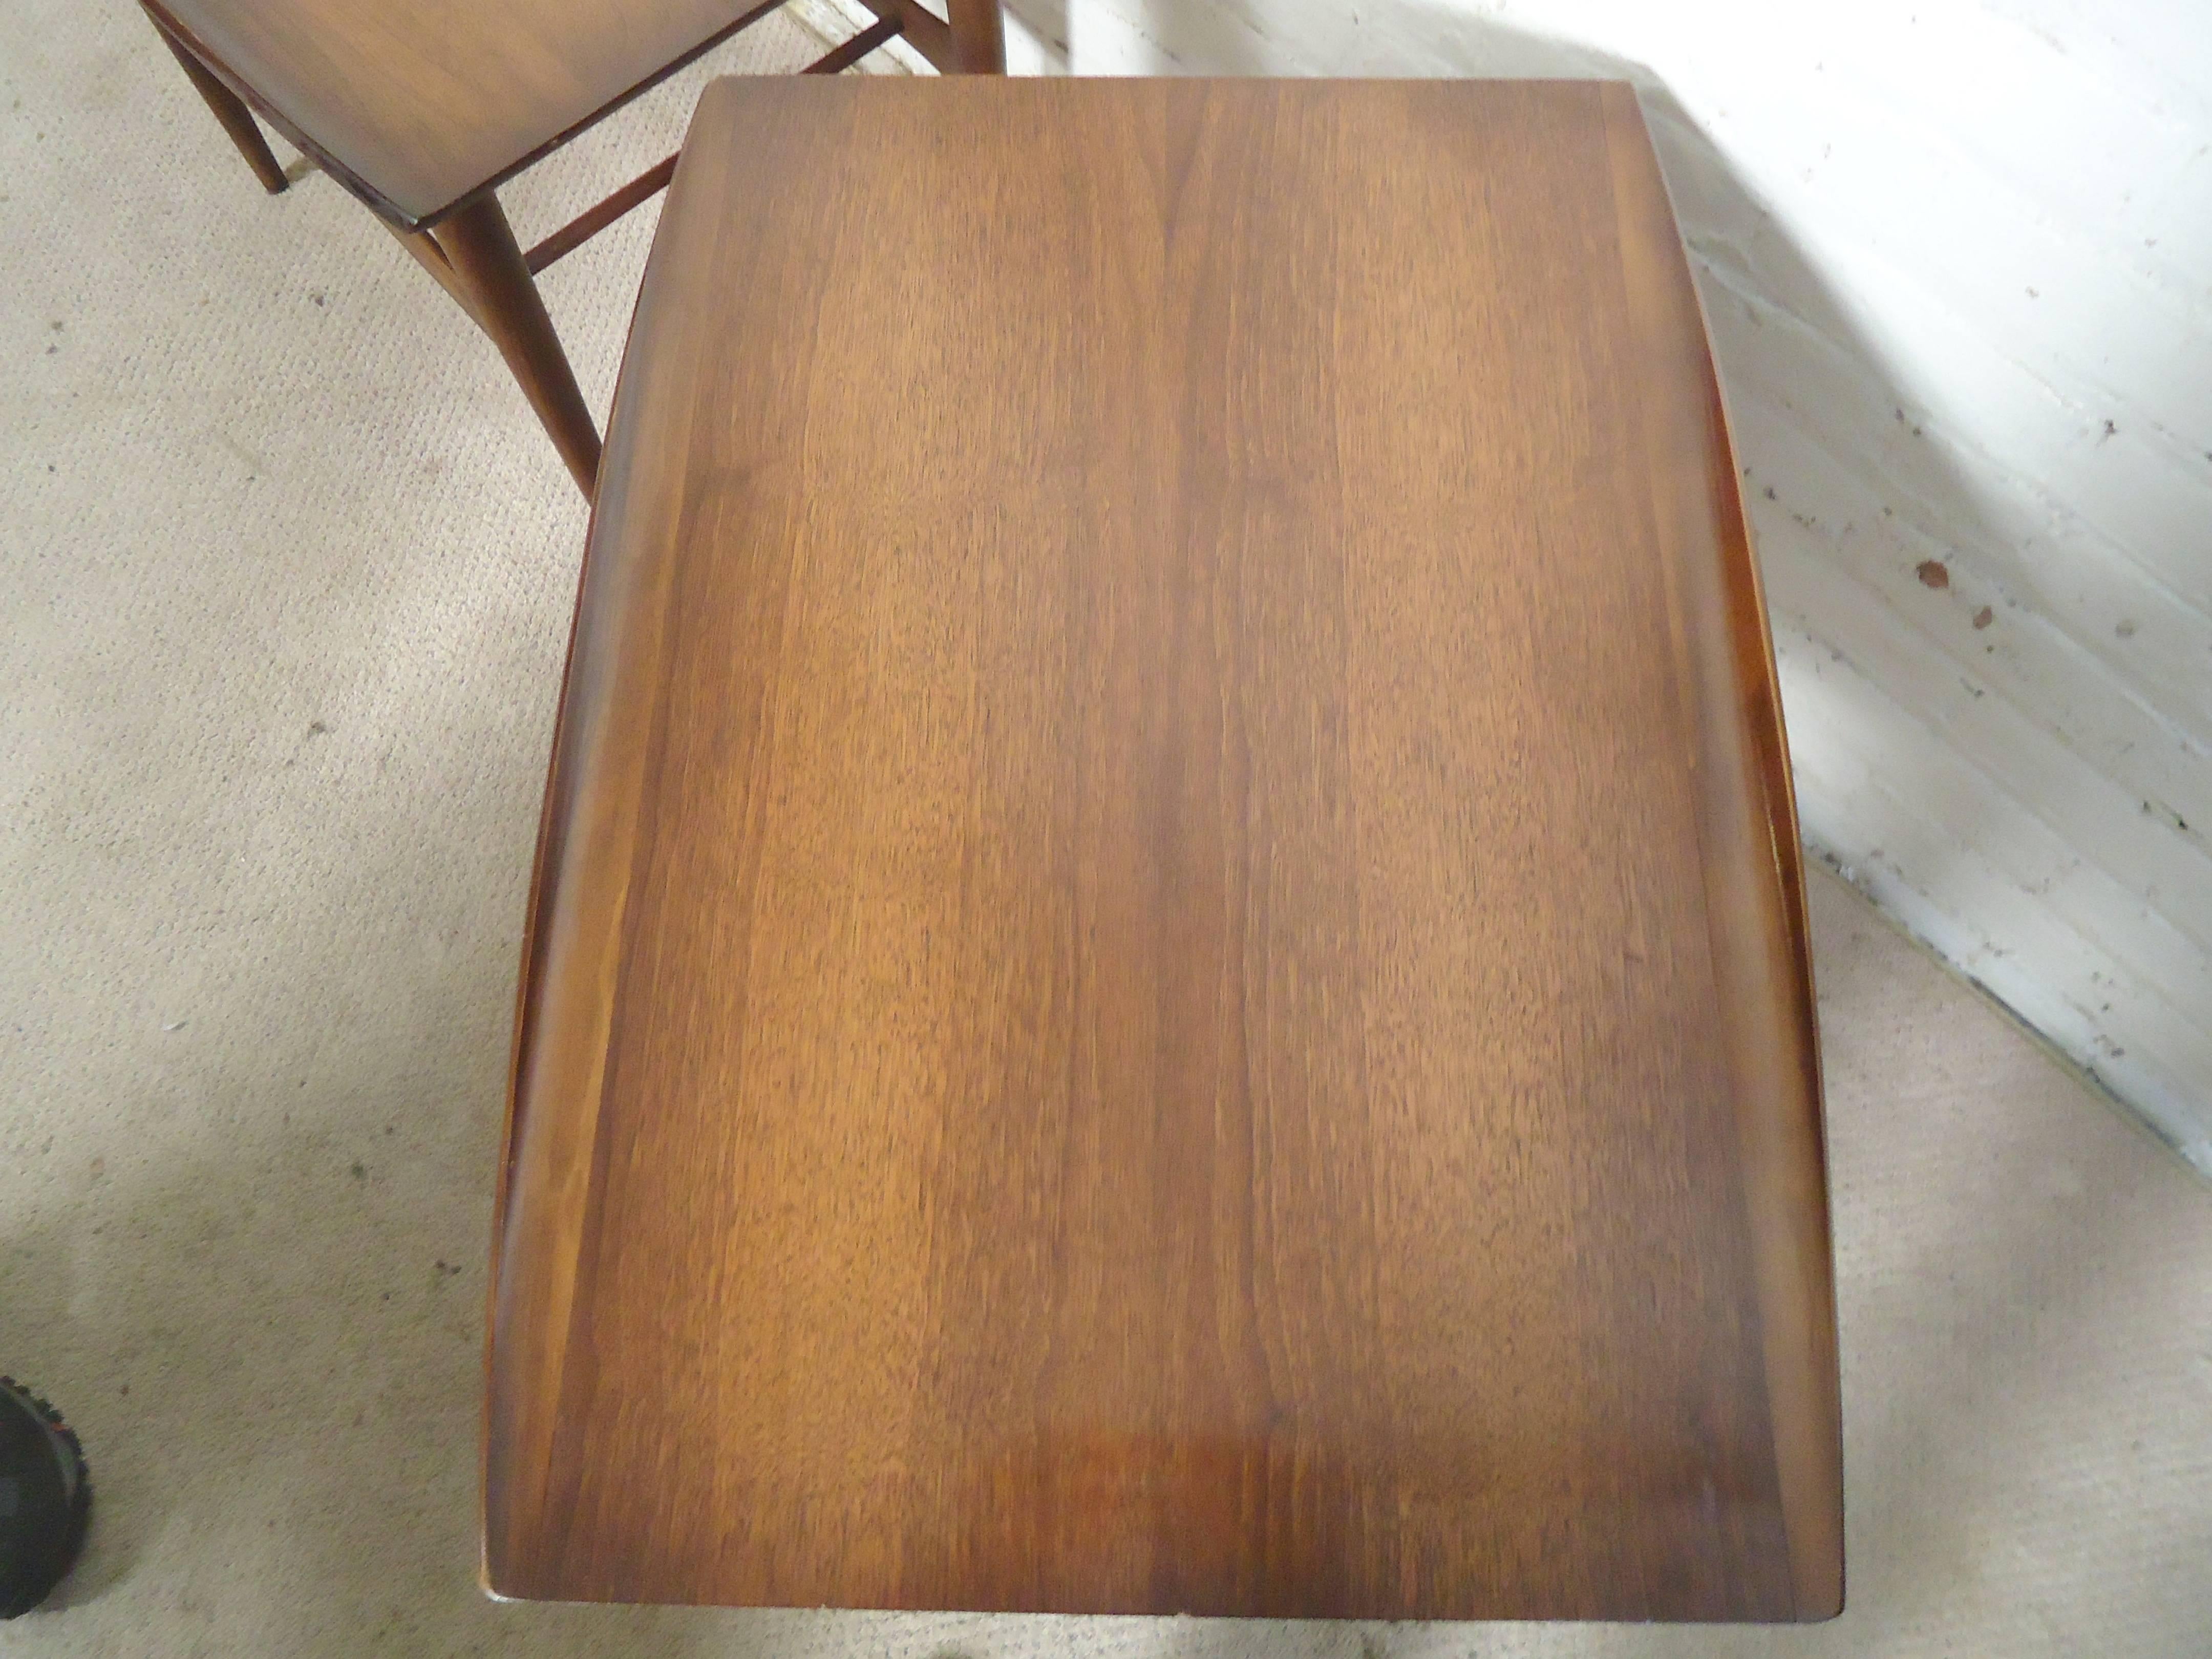 Nicely designed tables with walnut grain, sculpted legs, shelf and turned edges. Danish modern style that is great for home or office.

(Please confirm item location NY or NJ with dealer).
 